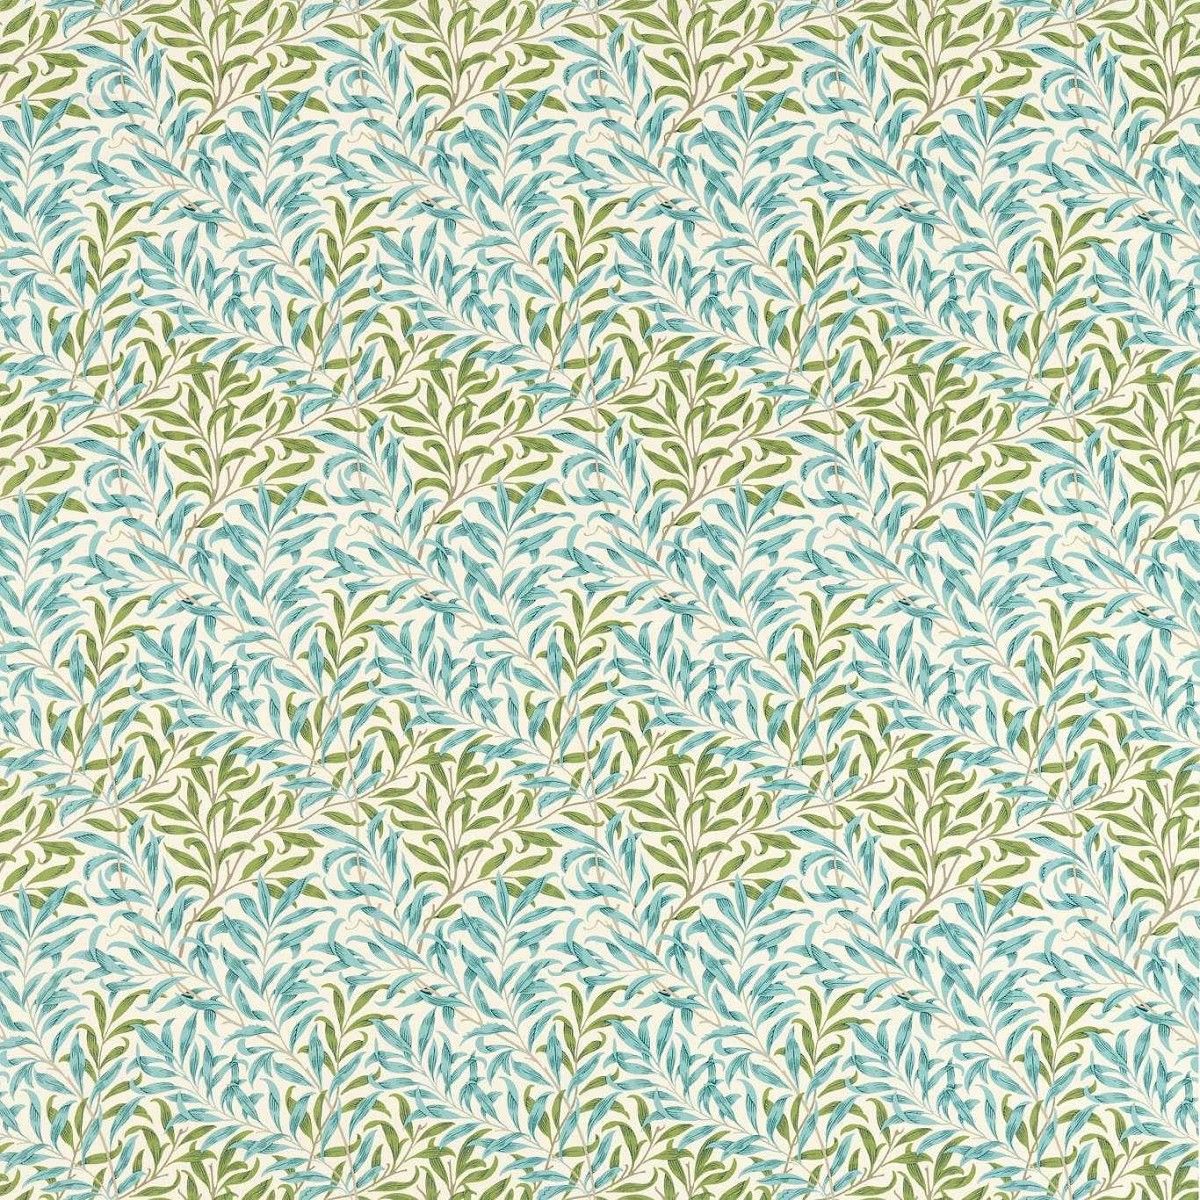 Willow Bough Outdoor Nettle/Sky Blue Fabric by William Morris & Co.